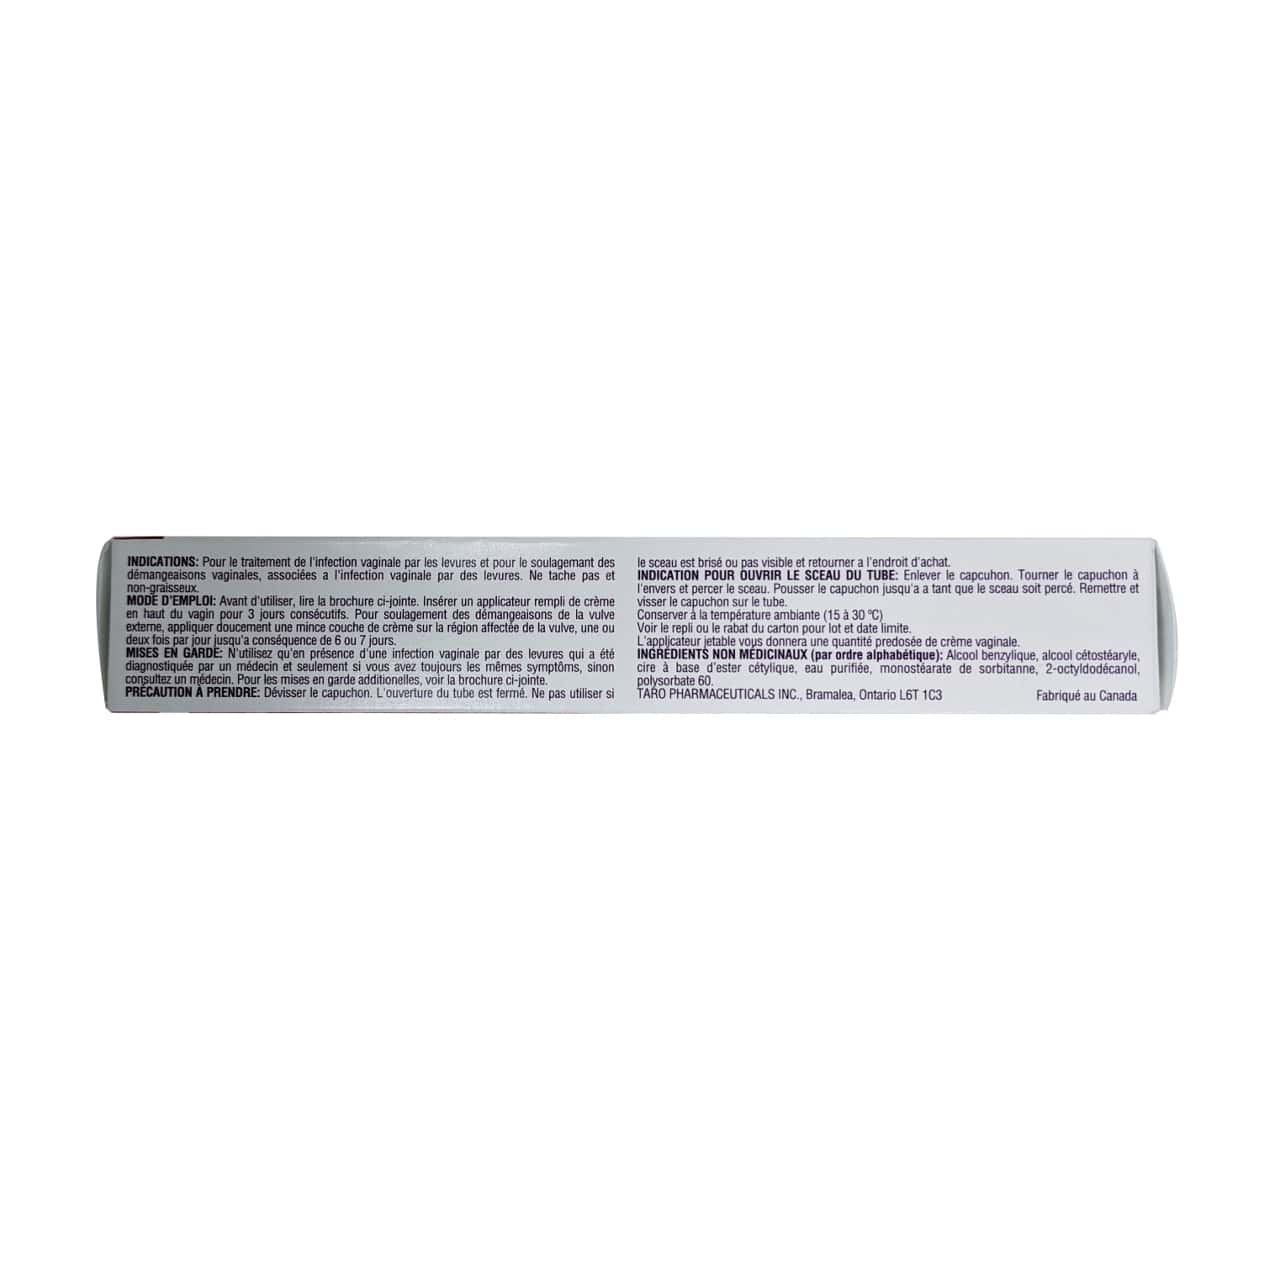 Indications, directions, warnings, and ingredients for Taro Clotrimaderm Vaginal Cream 2% in French